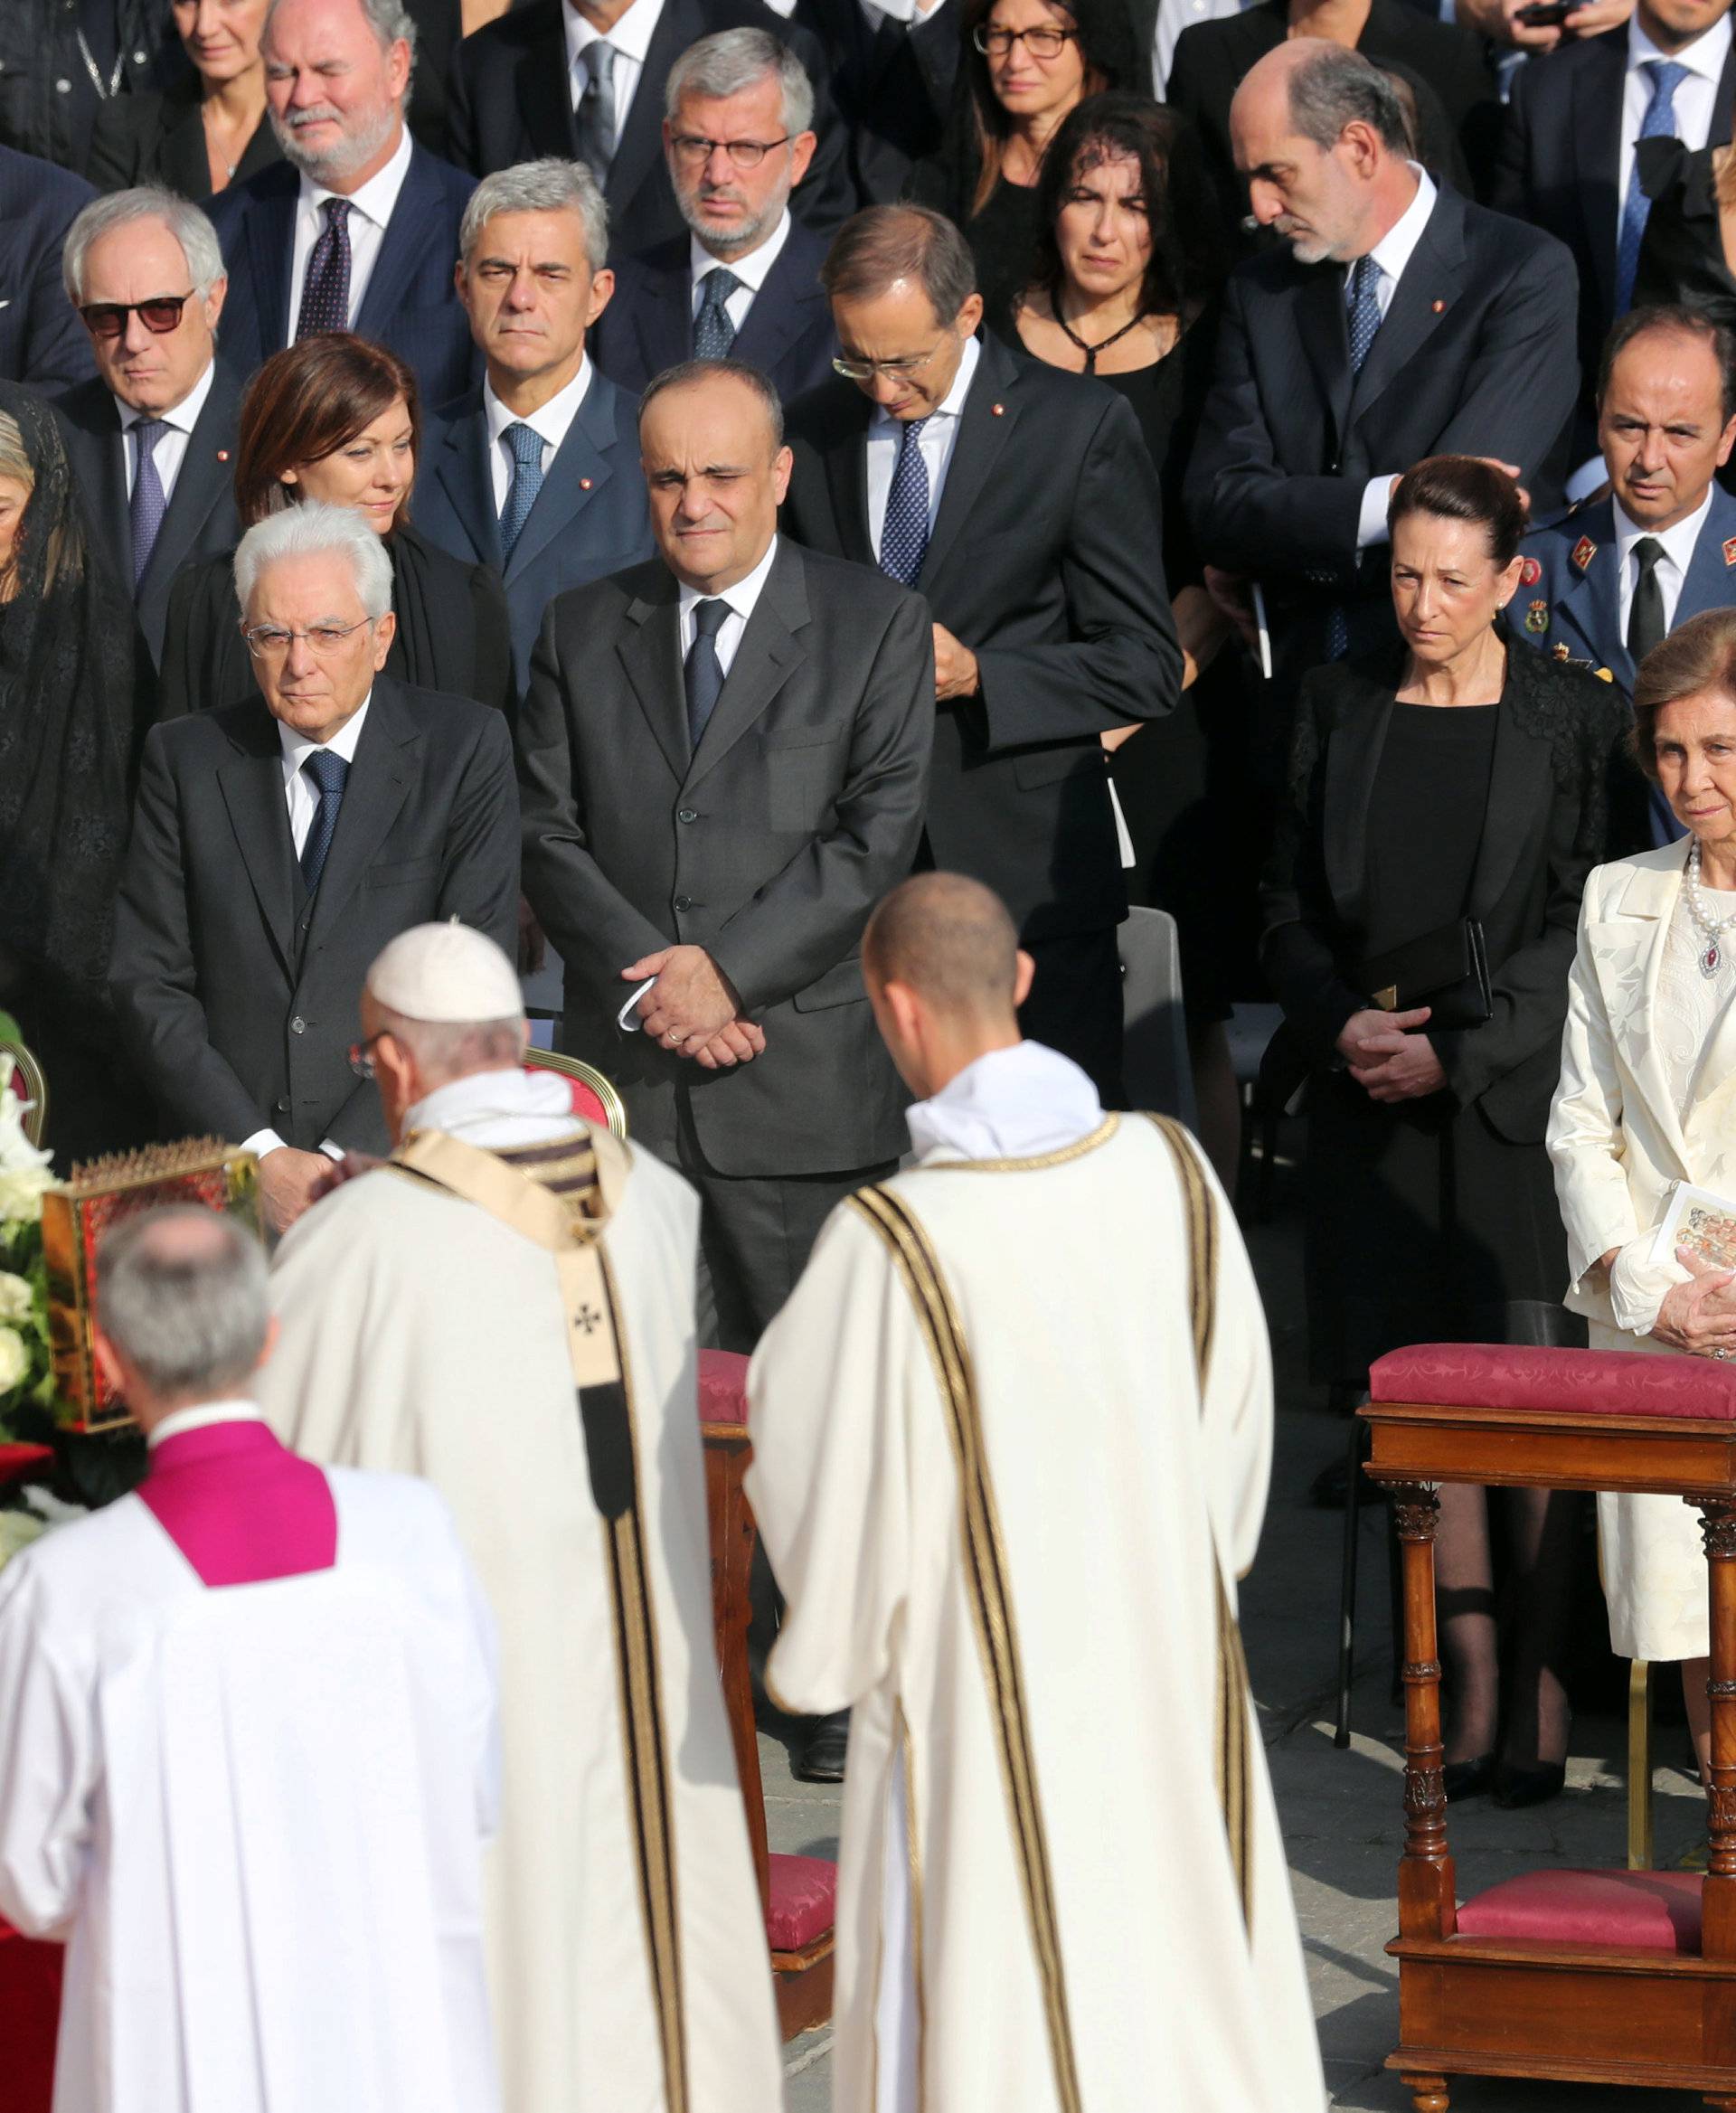 Former Queen Sofia of Spain watches as Pope Francis arrives to lead a Mass for the canonisation of the Pope Paul VI and El Salvador's Archbishop Oscar Romero at the Vatican